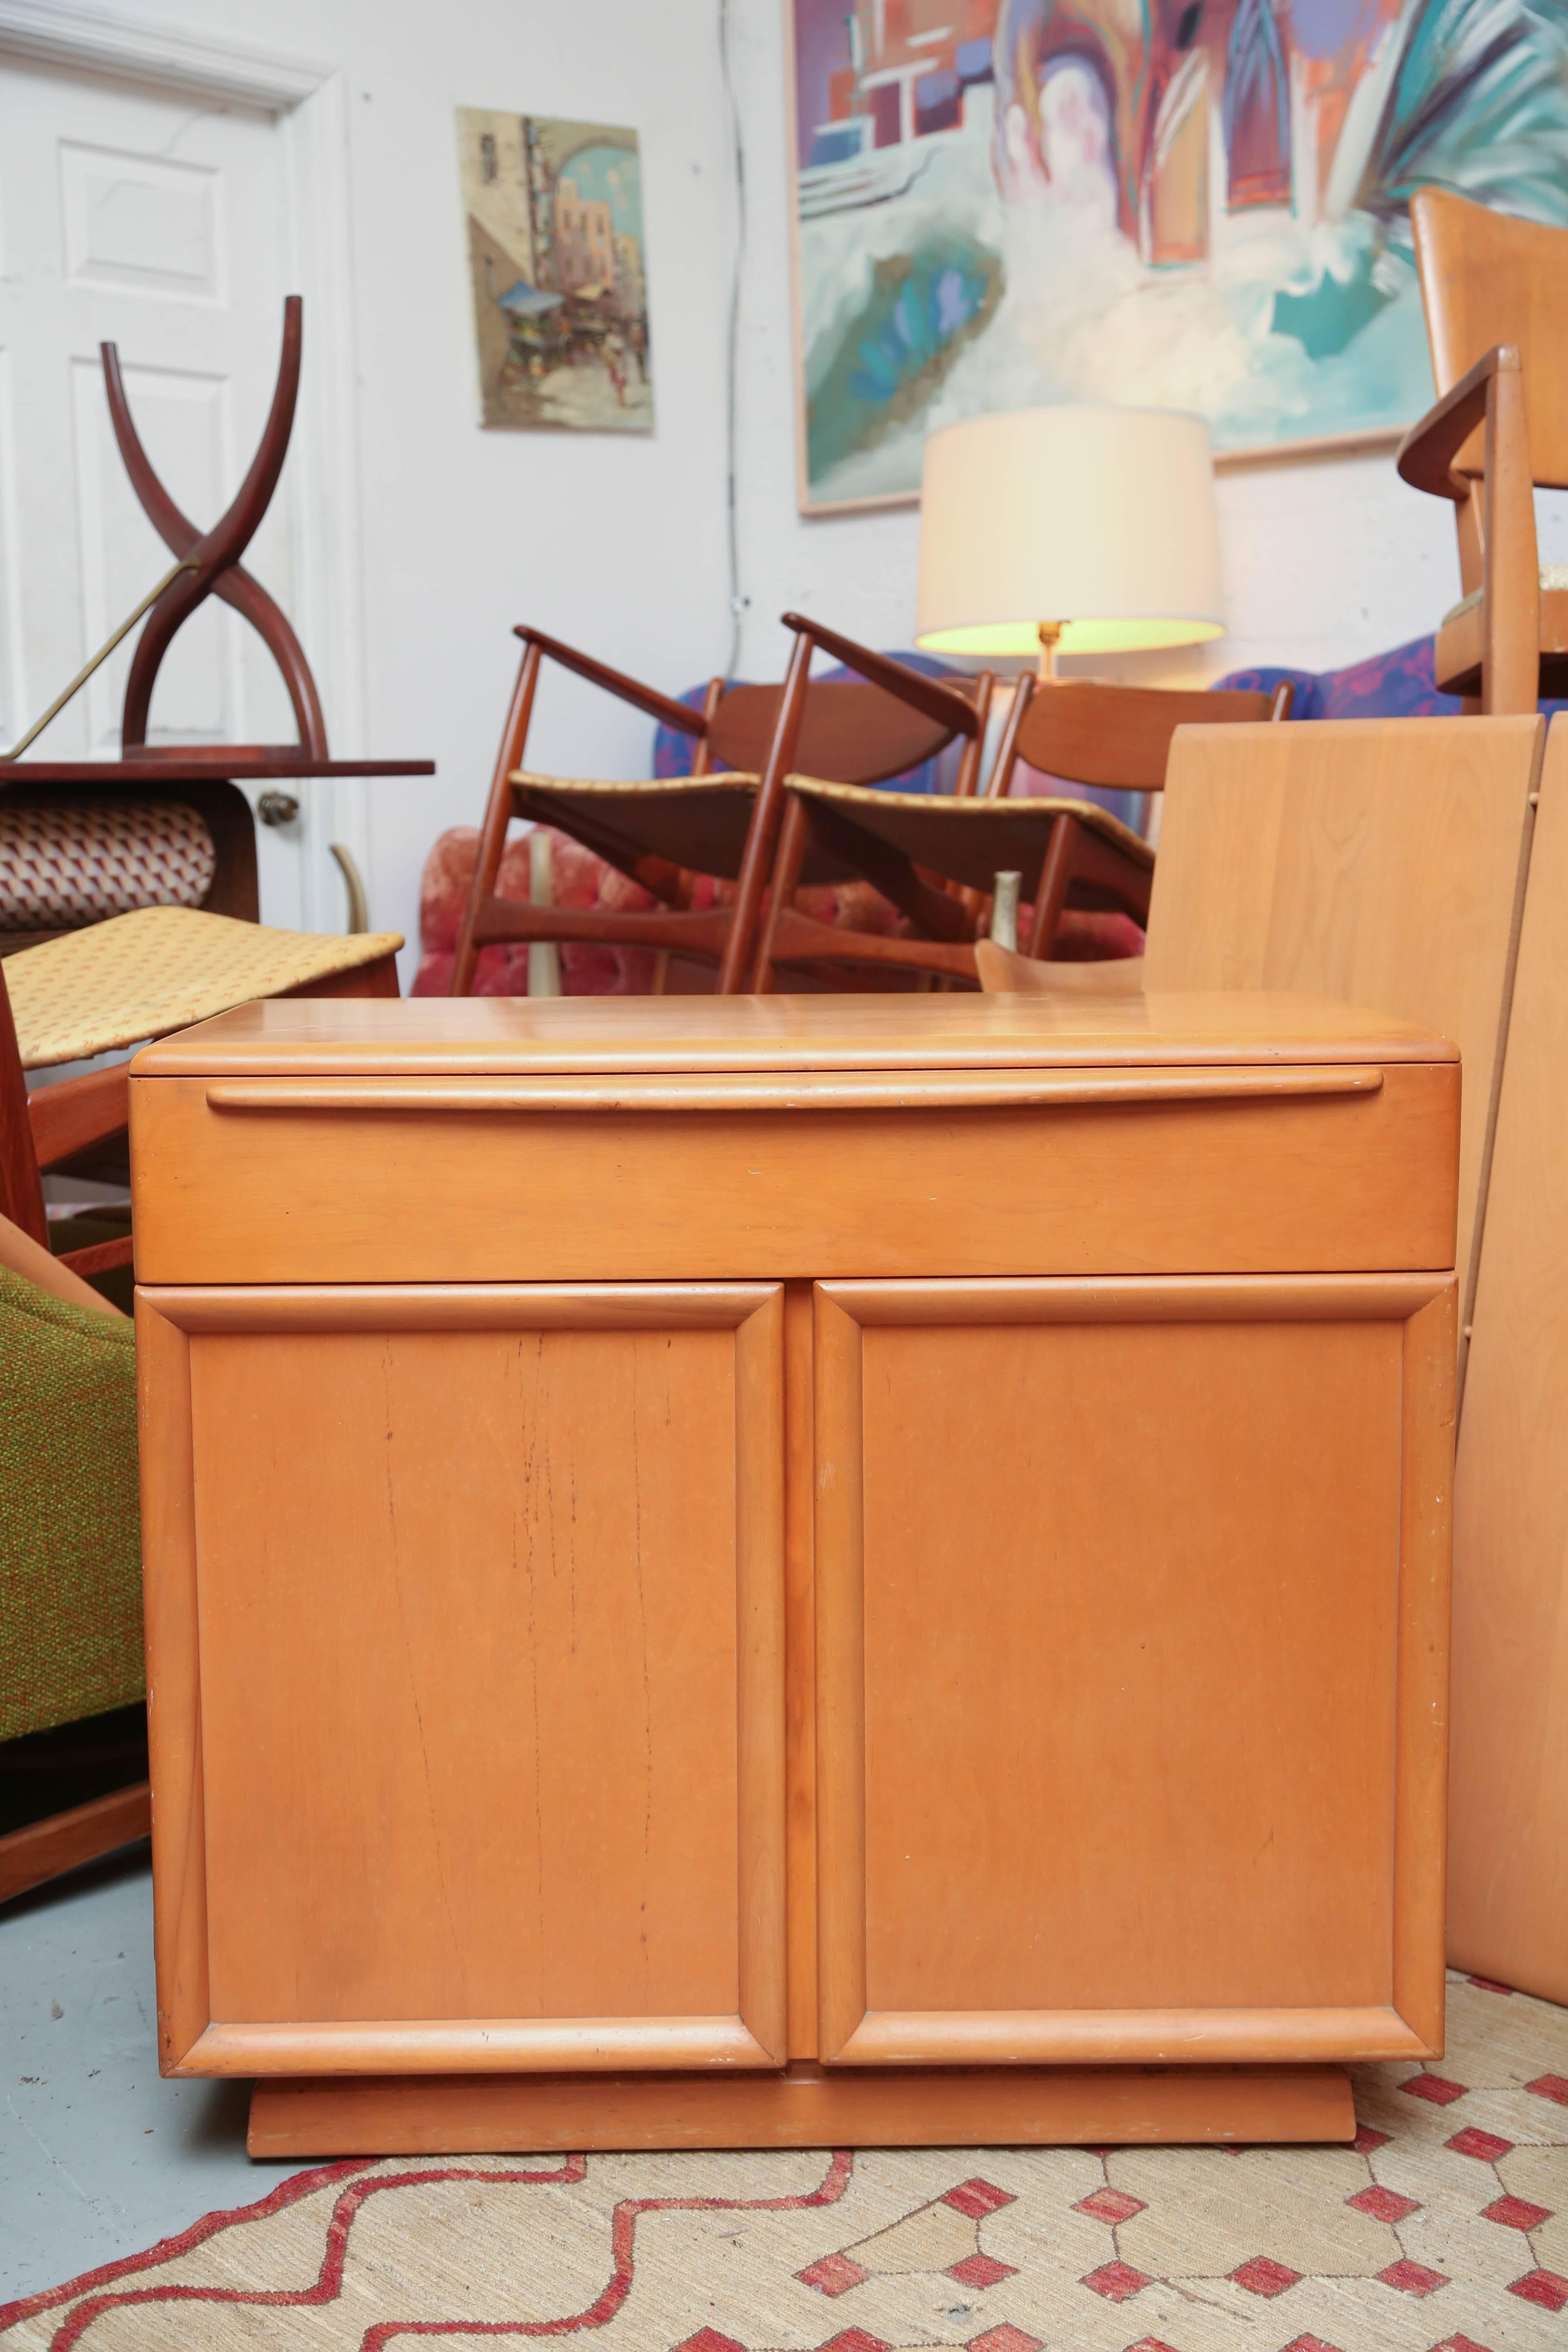 Small credenza or cabinet on wheels for easy moving by Heywood Wakefield.